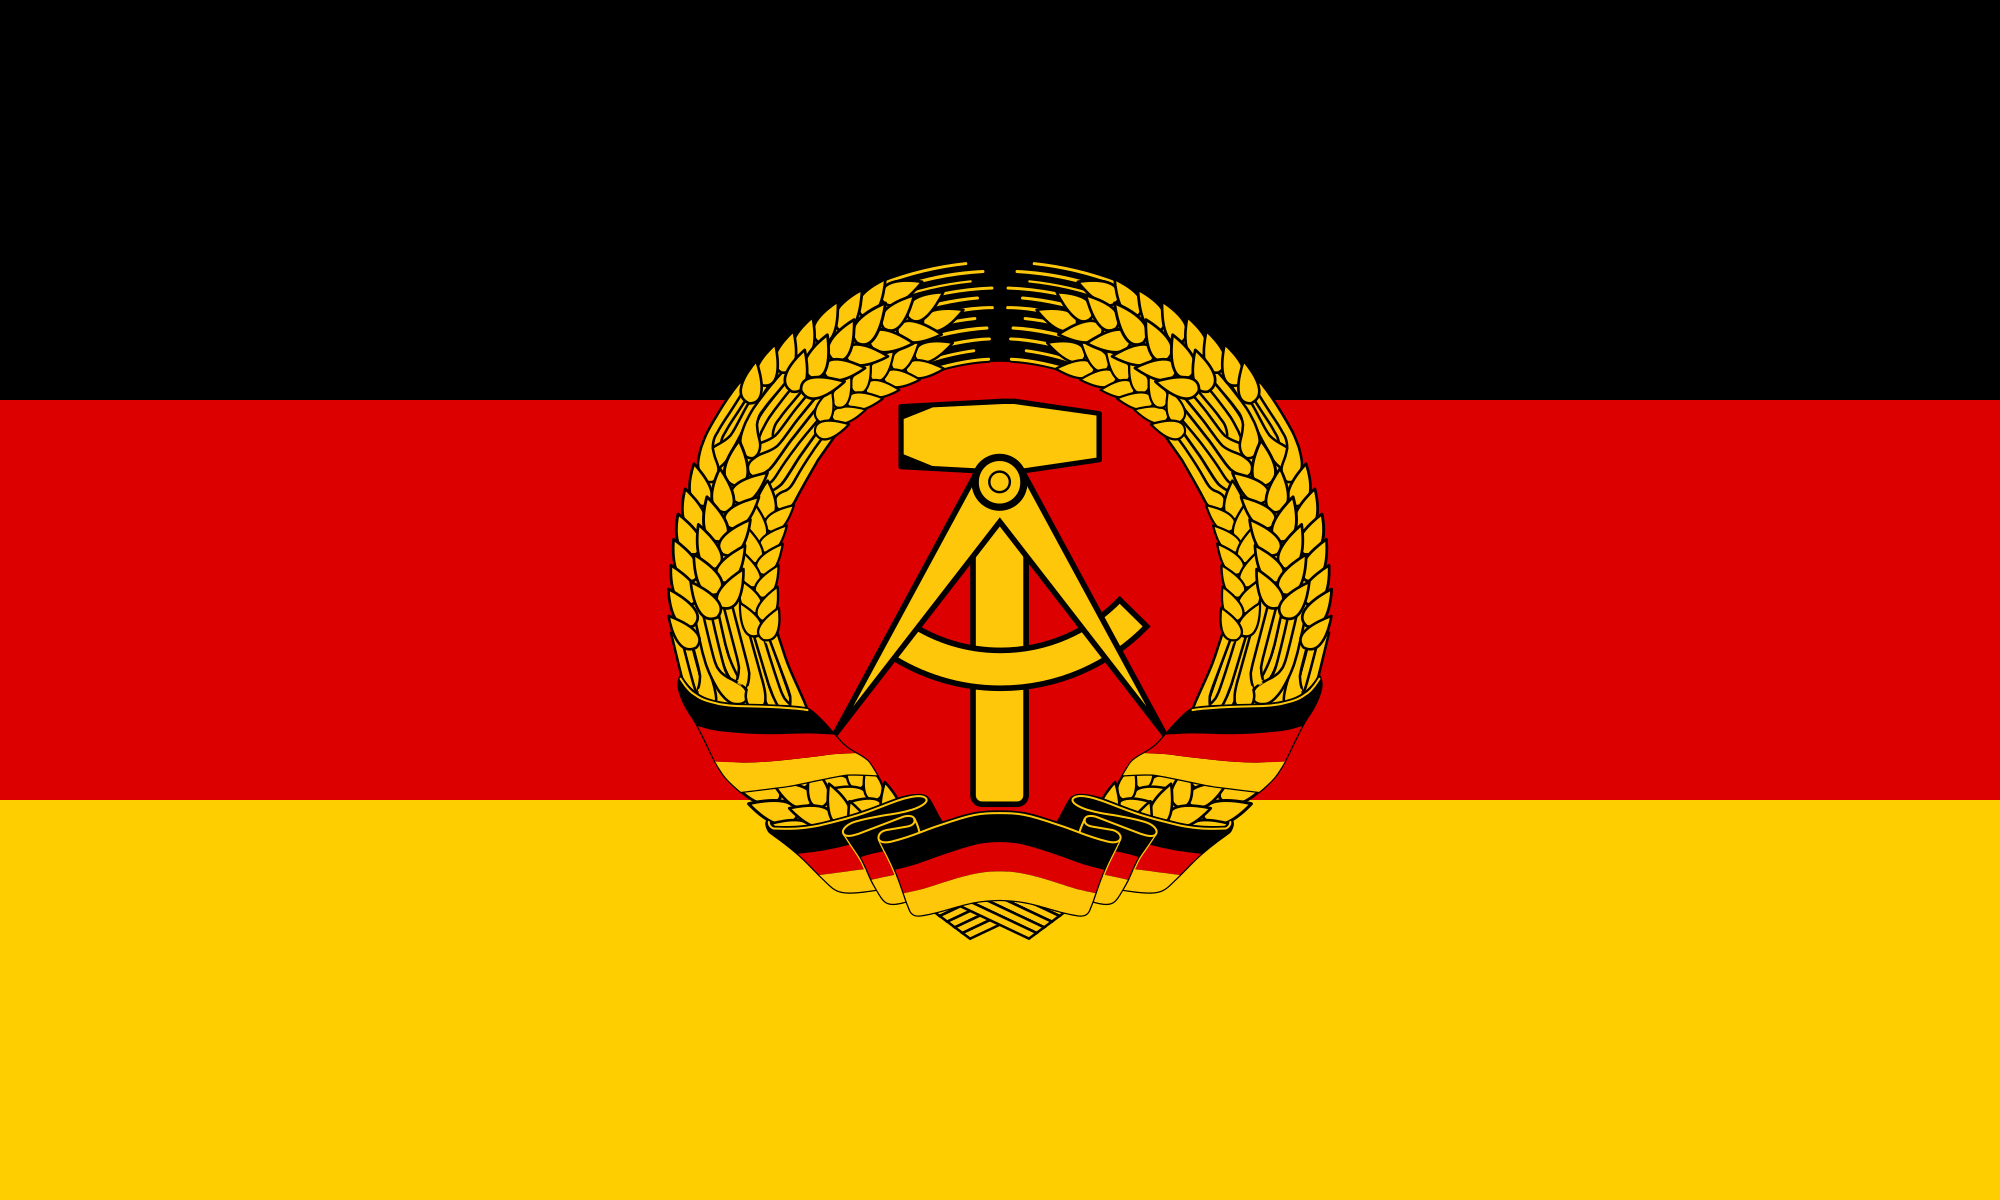 Red Yellow -Green Flag Logo - German Flag. Flag of Germany Image. Site Provides Image